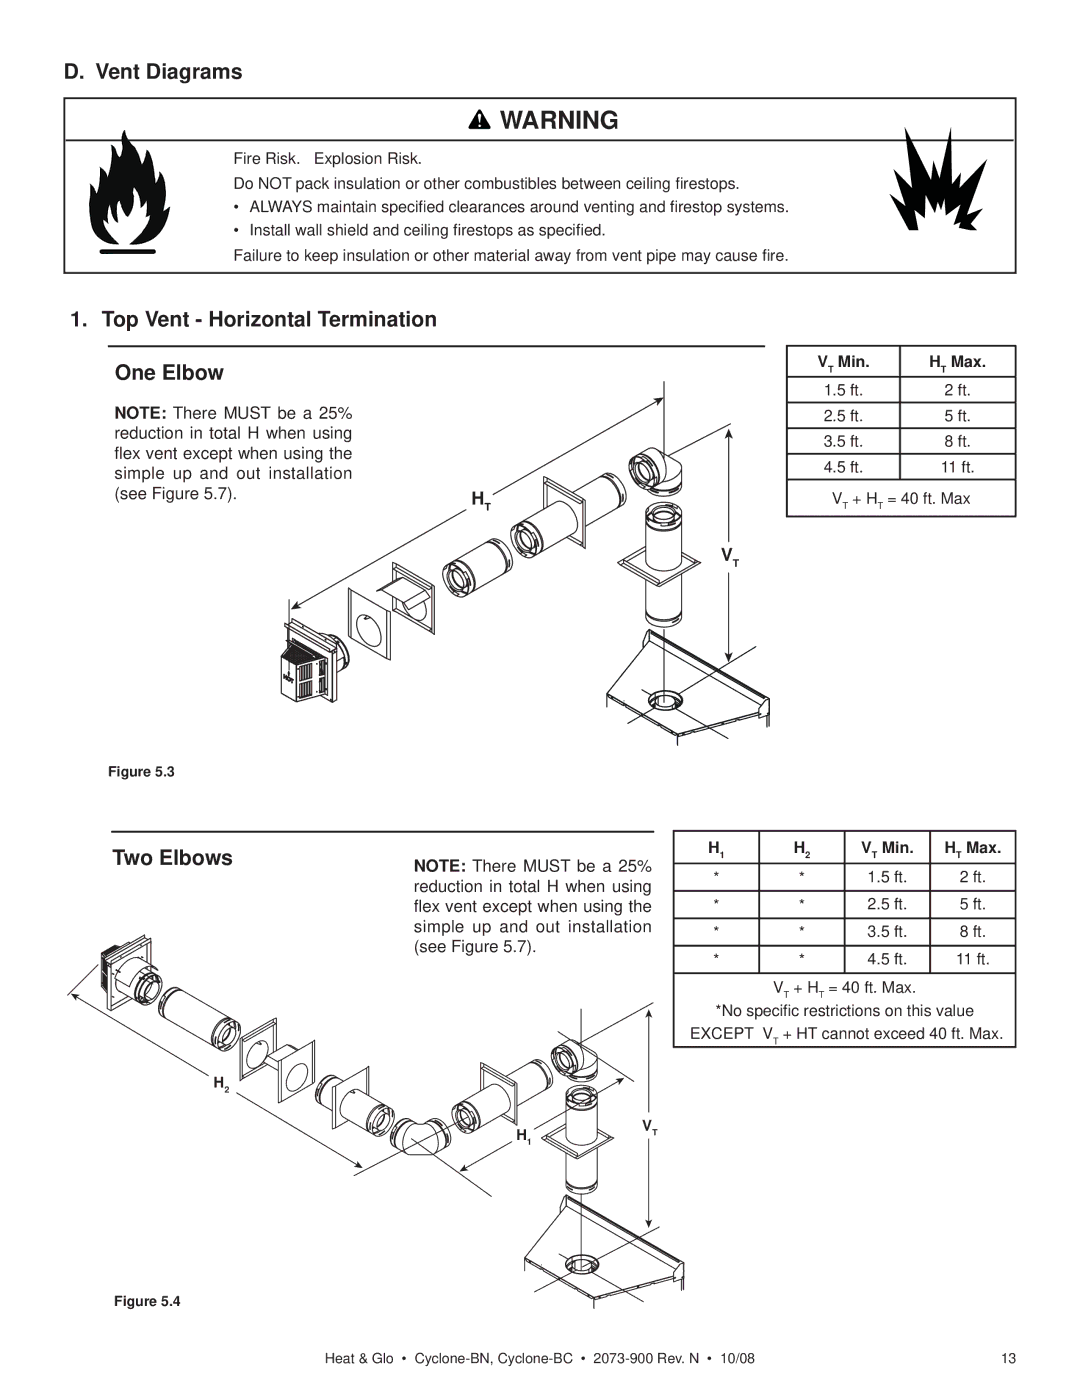 Hearth and Home Technologies Cyclone-BN Vent Diagrams, Top Vent Horizontal Termination One Elbow, Two Elbows, Min Max 